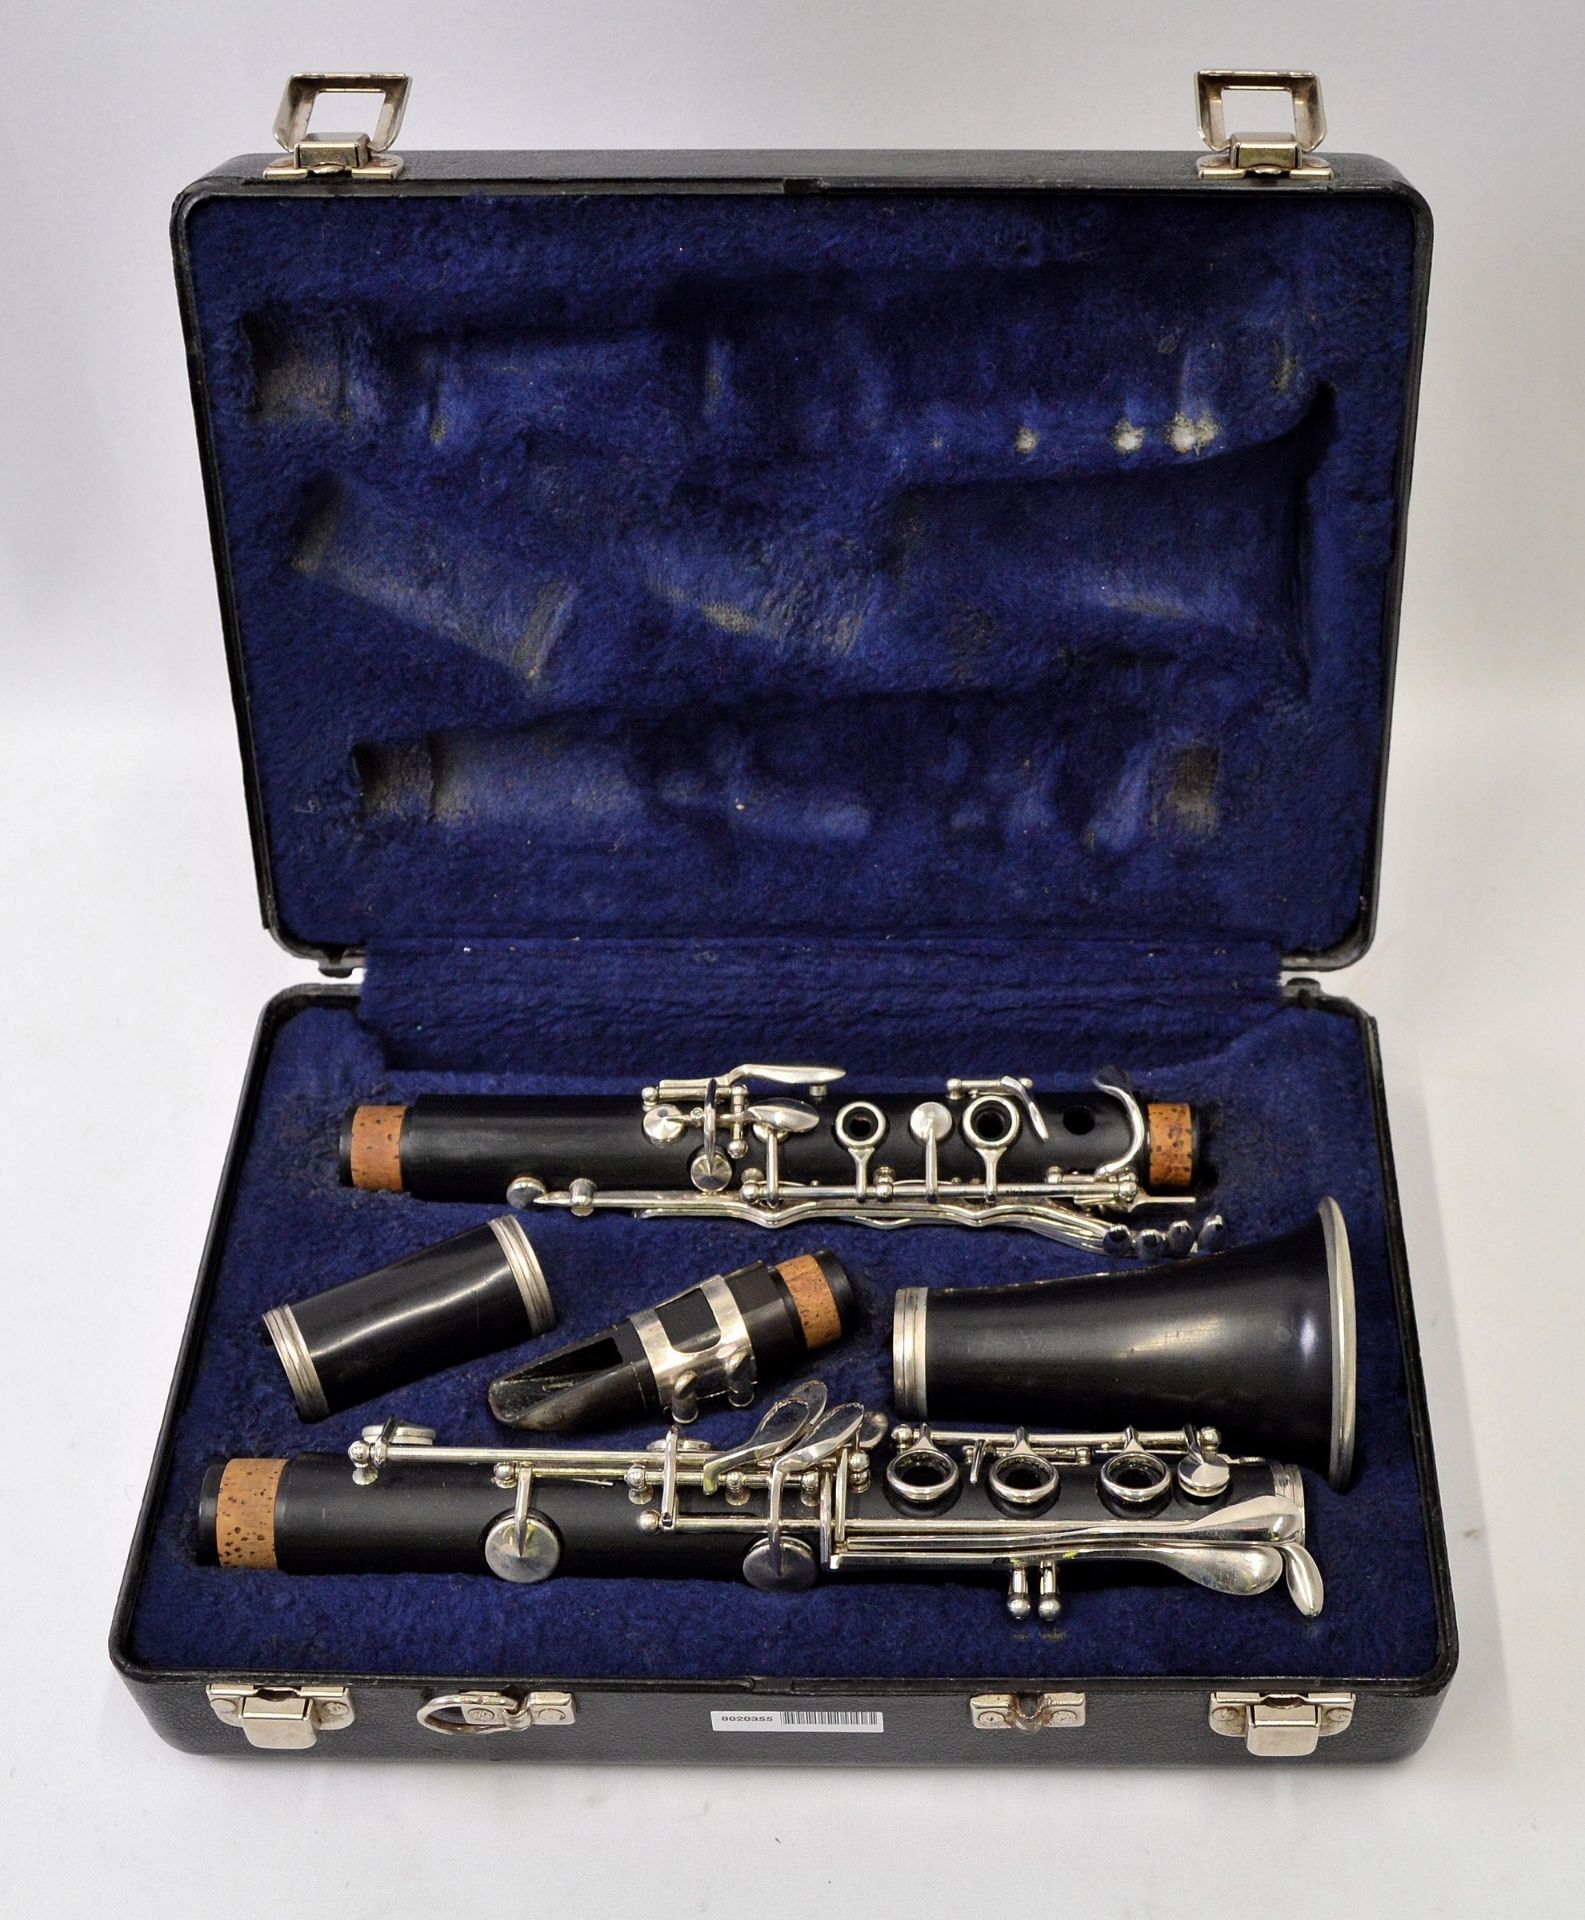 Selmer Clarinet with Case. Serial No. P0071920.